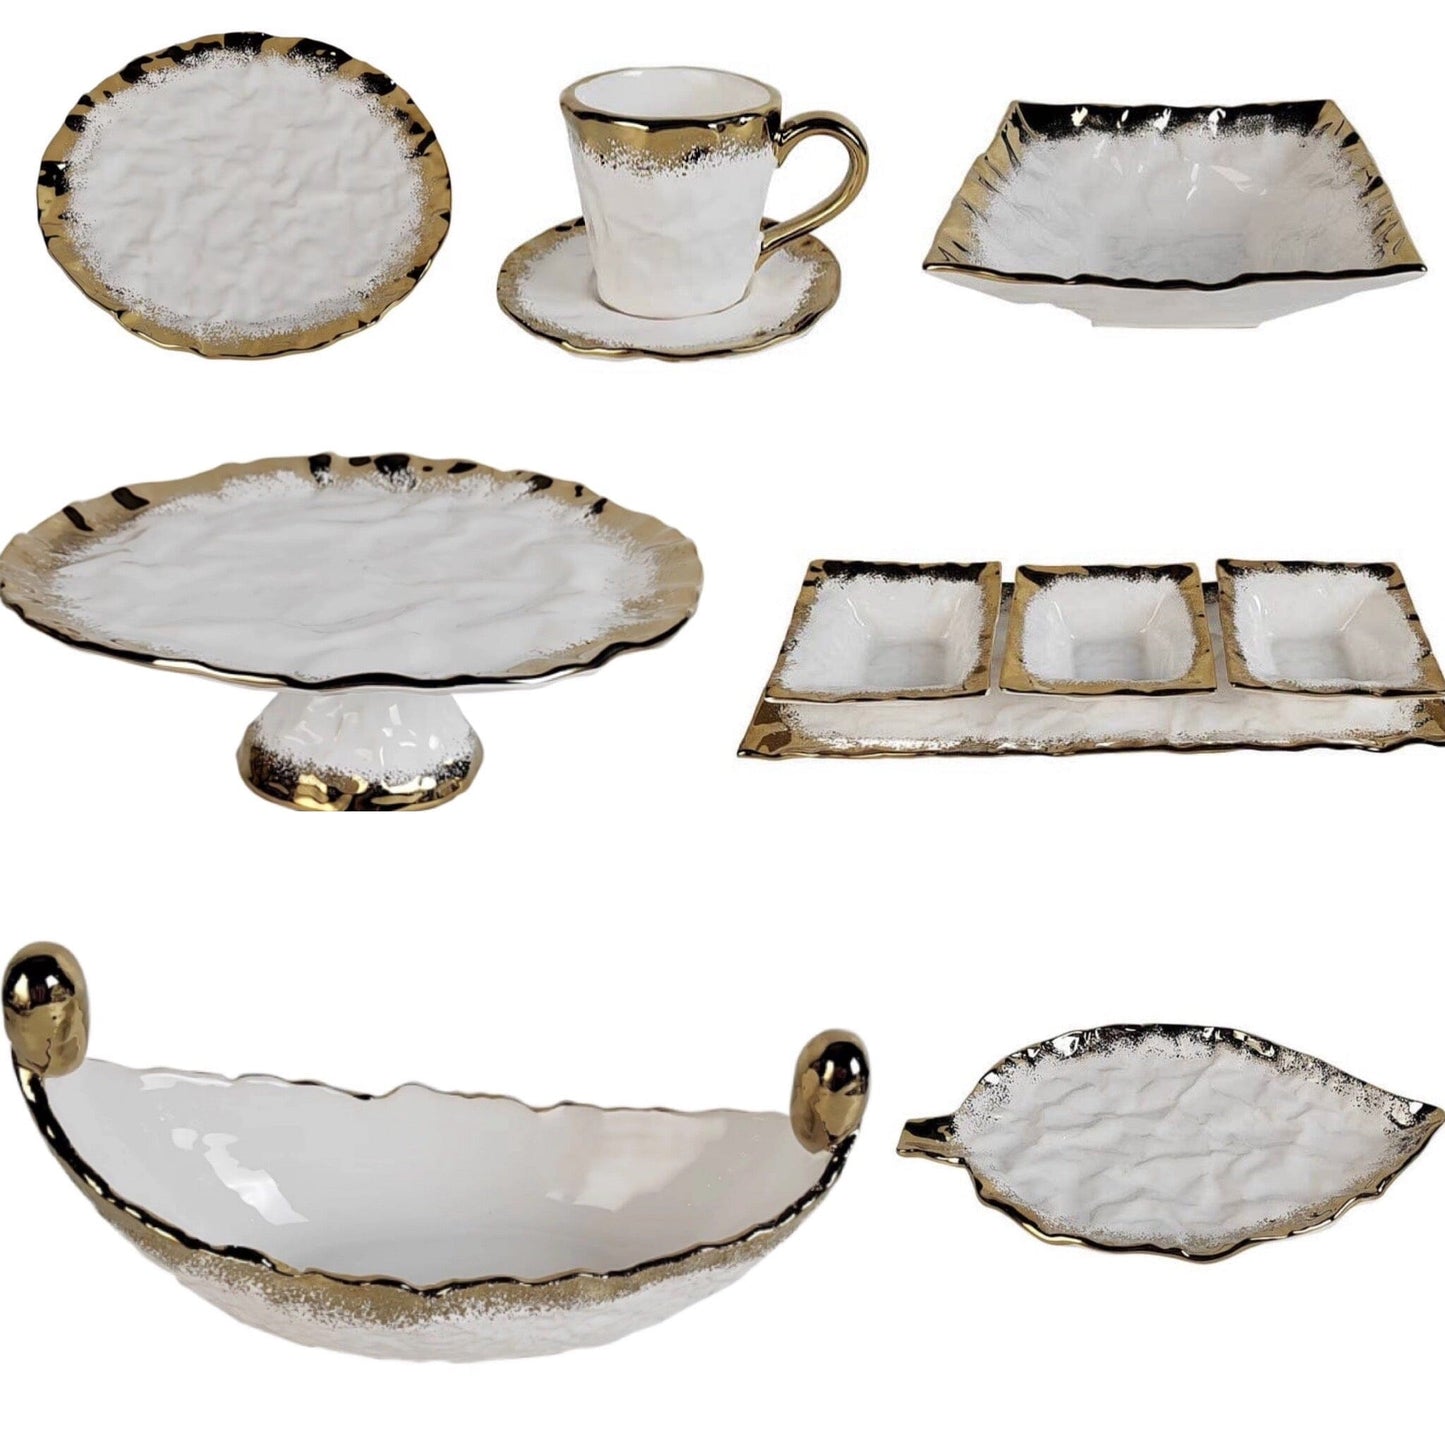 White Porcelain Leaf Dish with Opulent Gold Border 15" Plates High Class Touch - Home Decor 